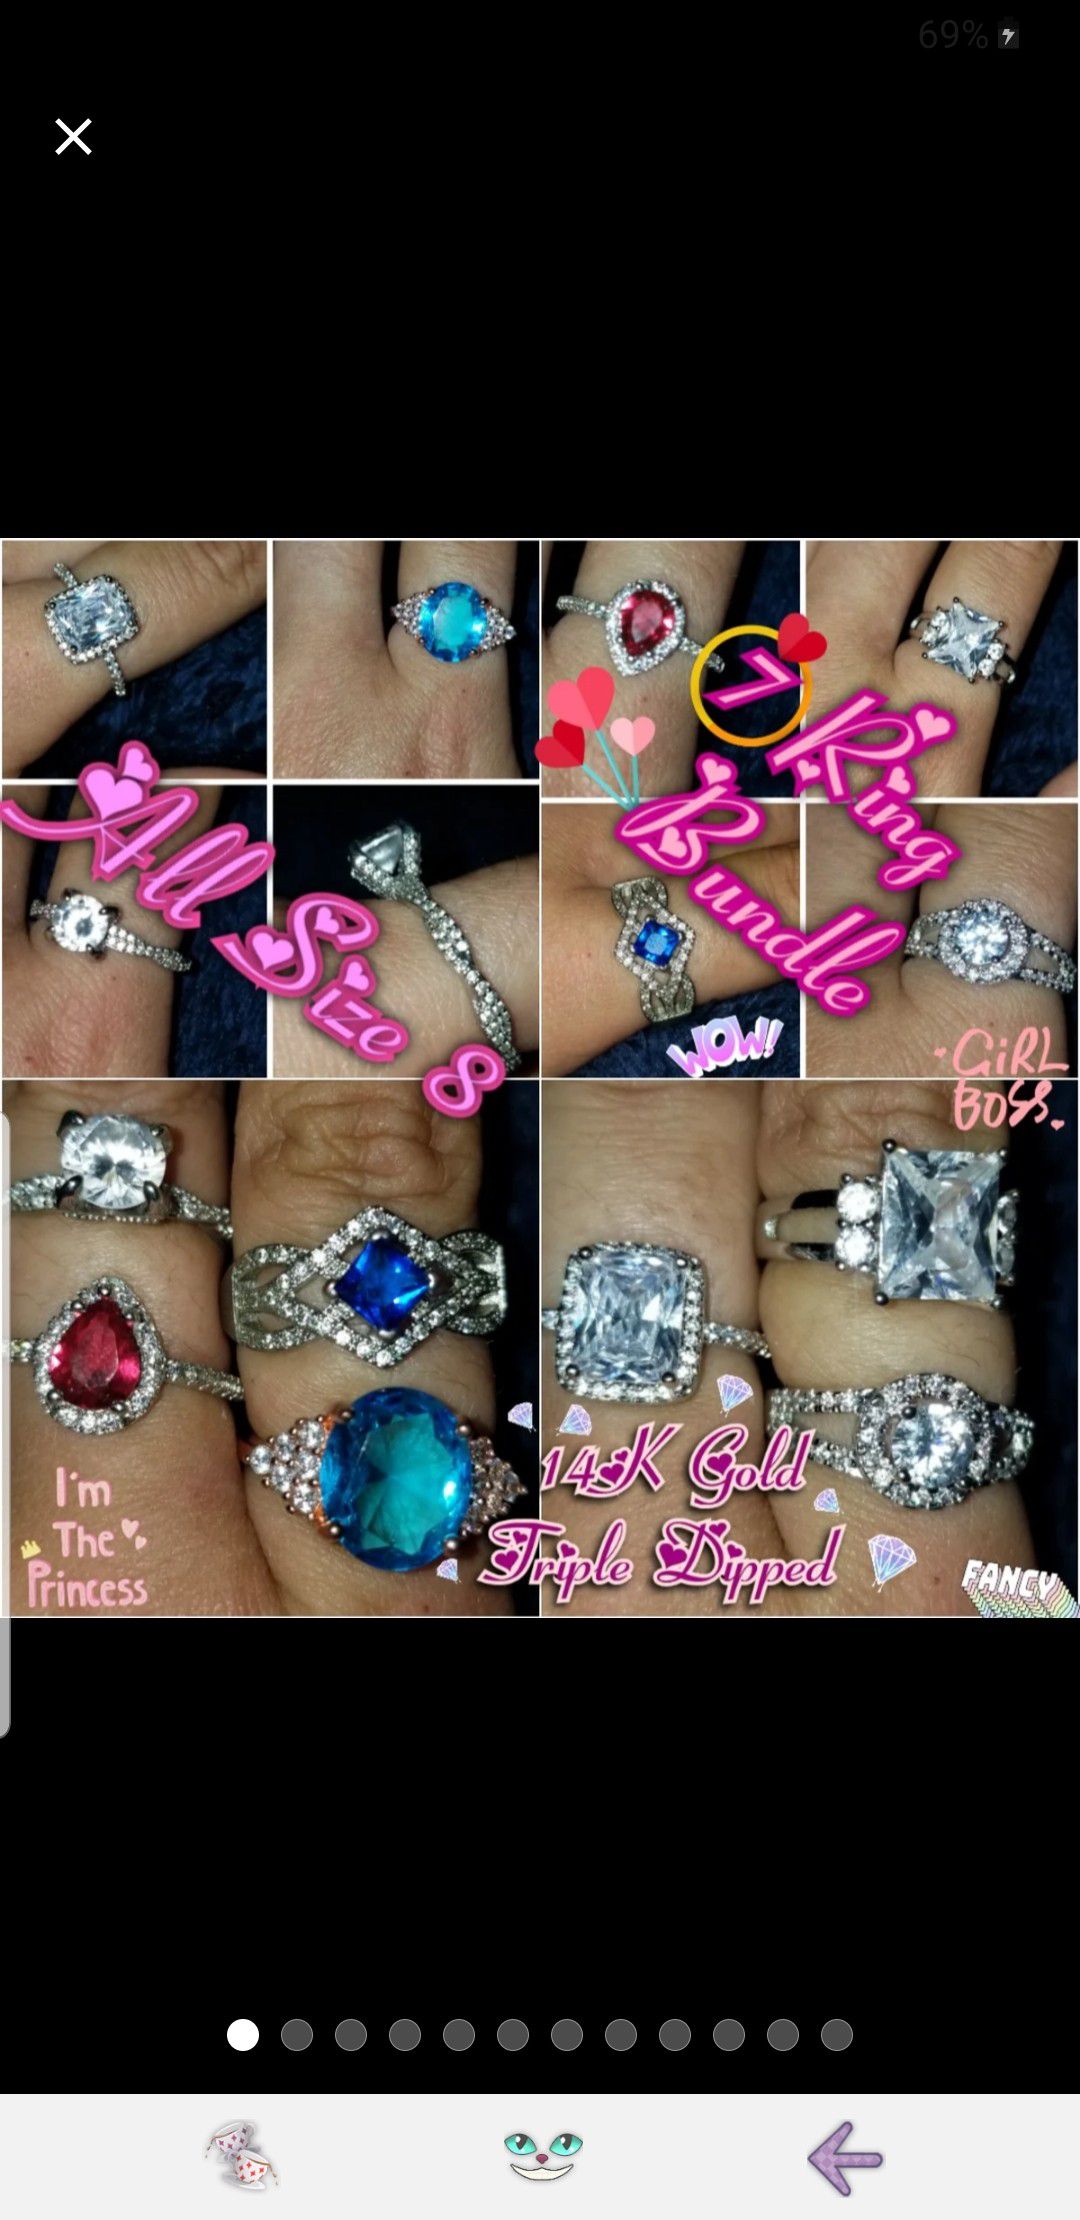 7 rings- size 8 NWOT